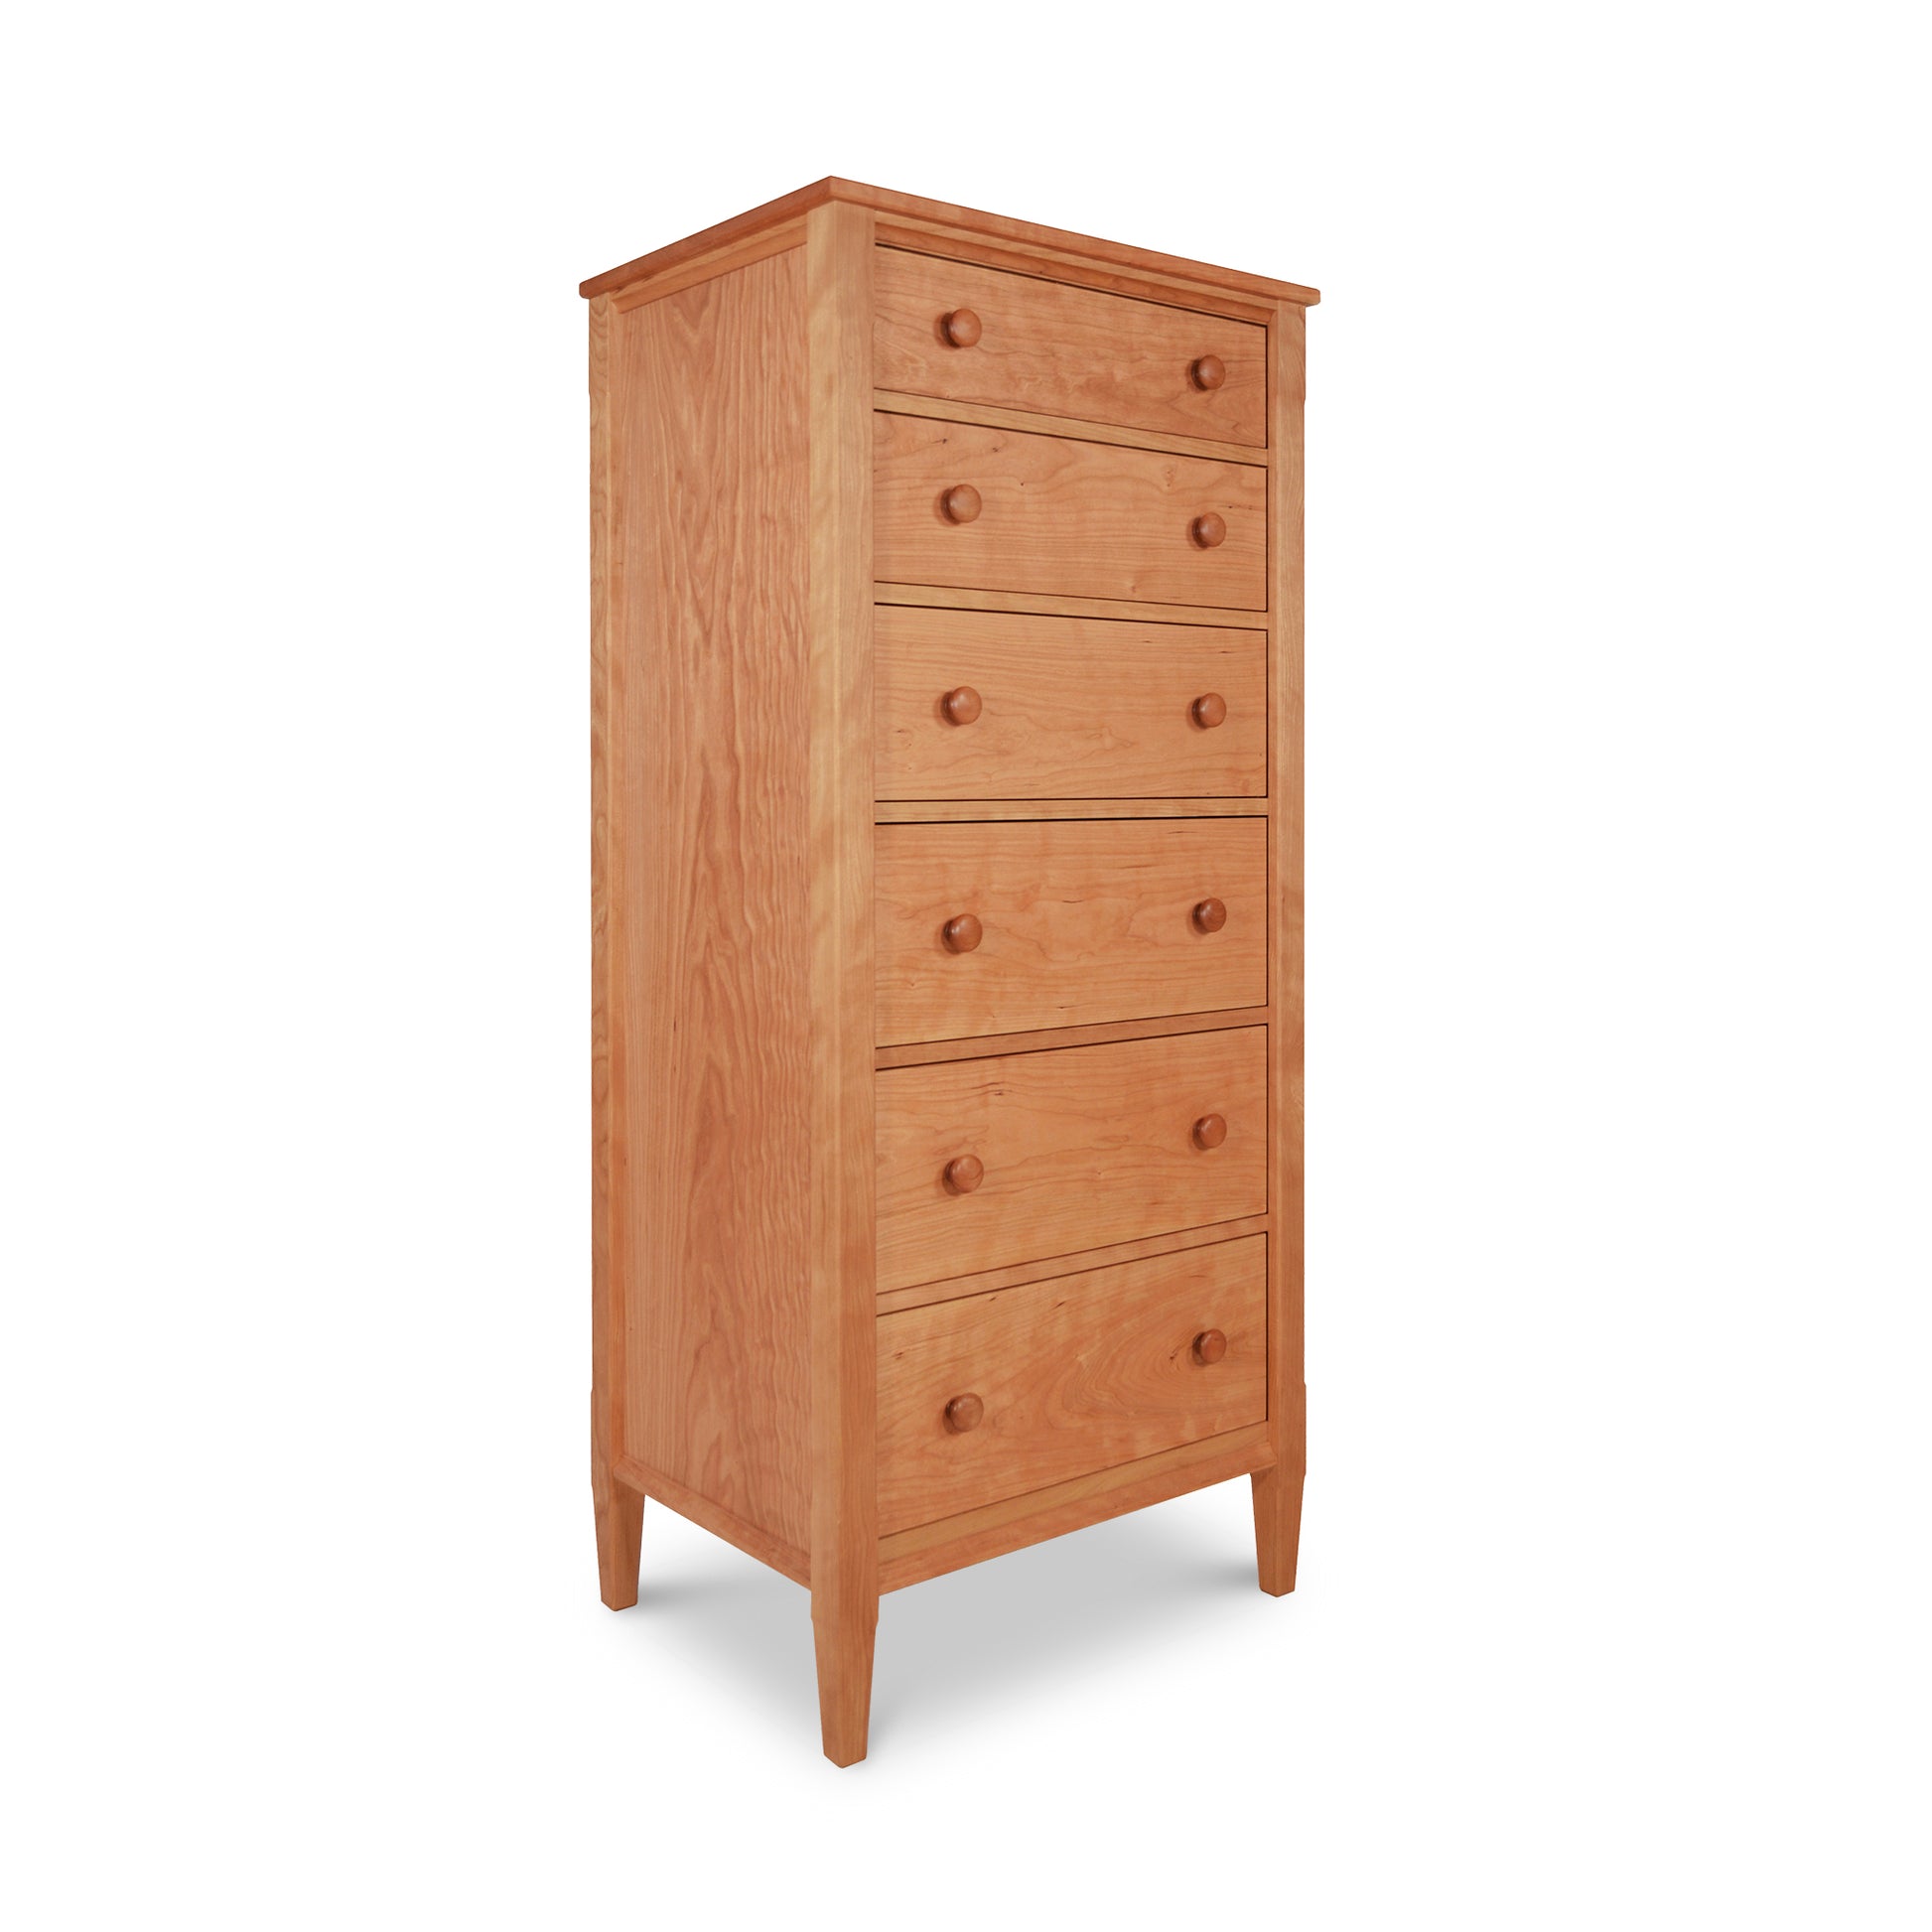 Vermont Shaker Lingerie Chest by Maple Corner Woodworks - Six Drawer, Solid Wood Design. Classic Vermont Shaker Furniture with Tapered Legs and Rounded Wooden Knobs. Premium Handmade American Made Furniture Perfect for Bedroom Storage. Visible Cherry or Walnut Wood Grain Enhances Elegance.